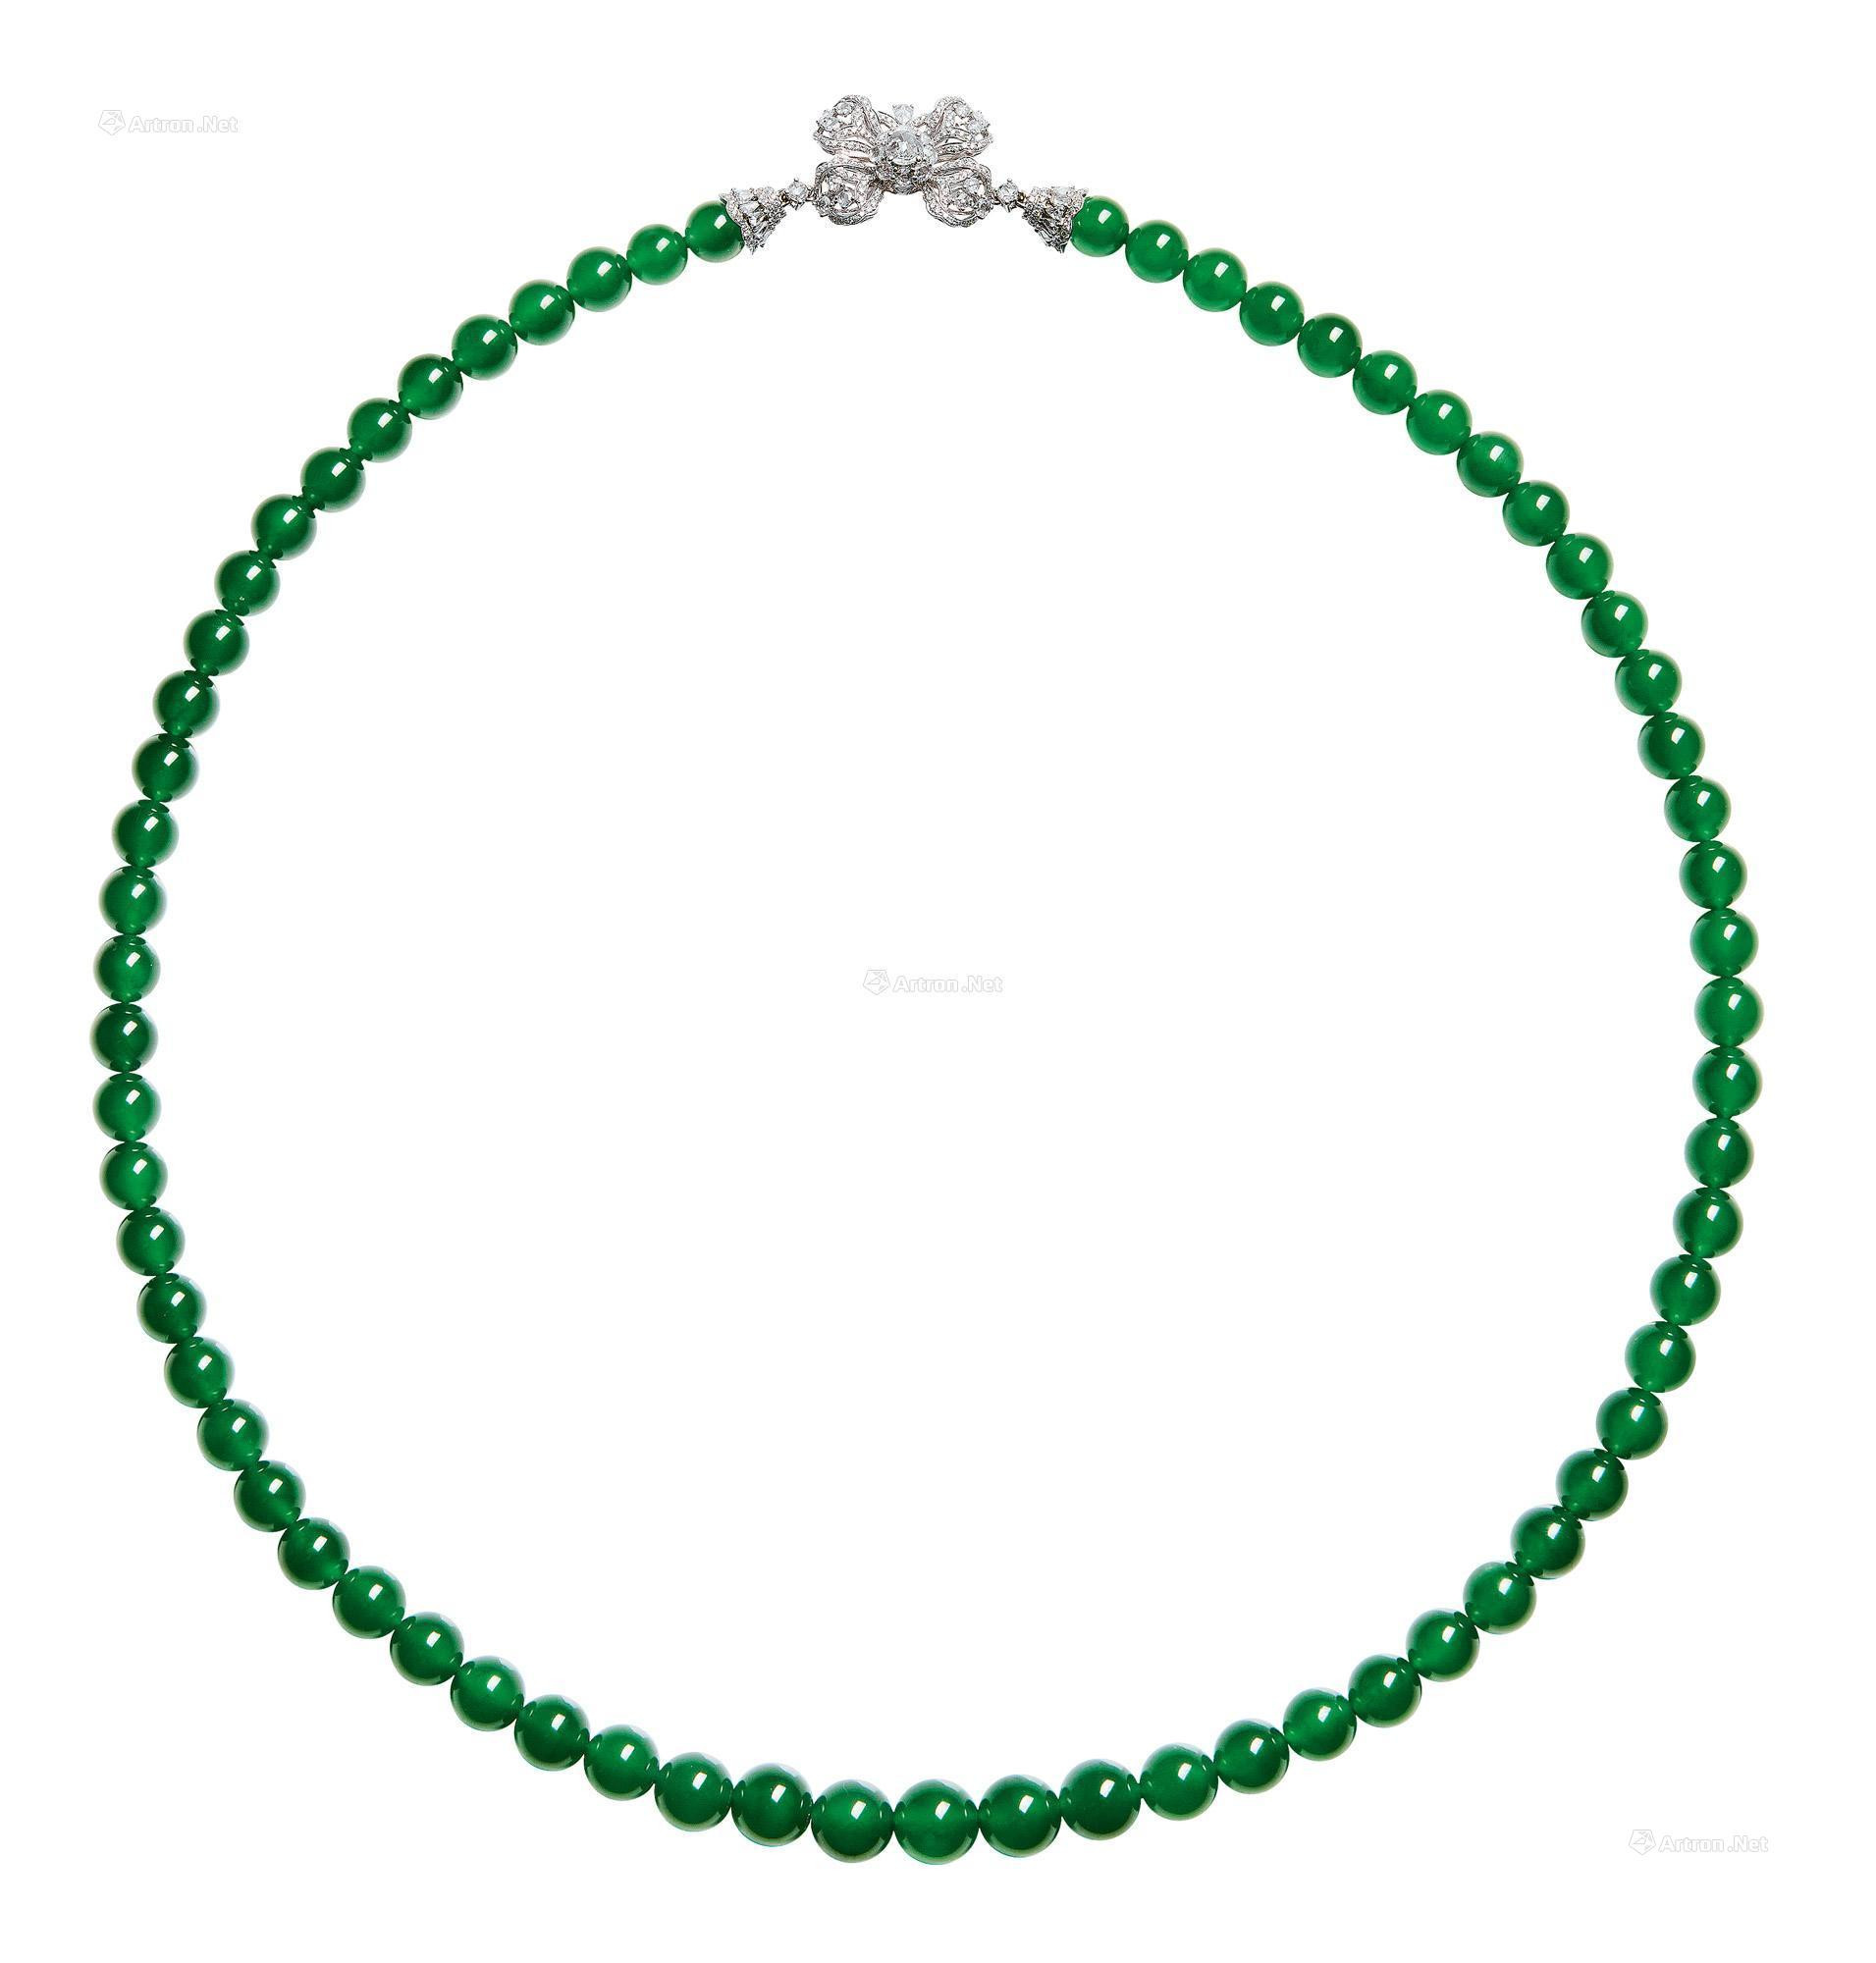 AN EXCEPTIONALLY FINE JADEITE BEAD AND DIAMOND NECKLACE